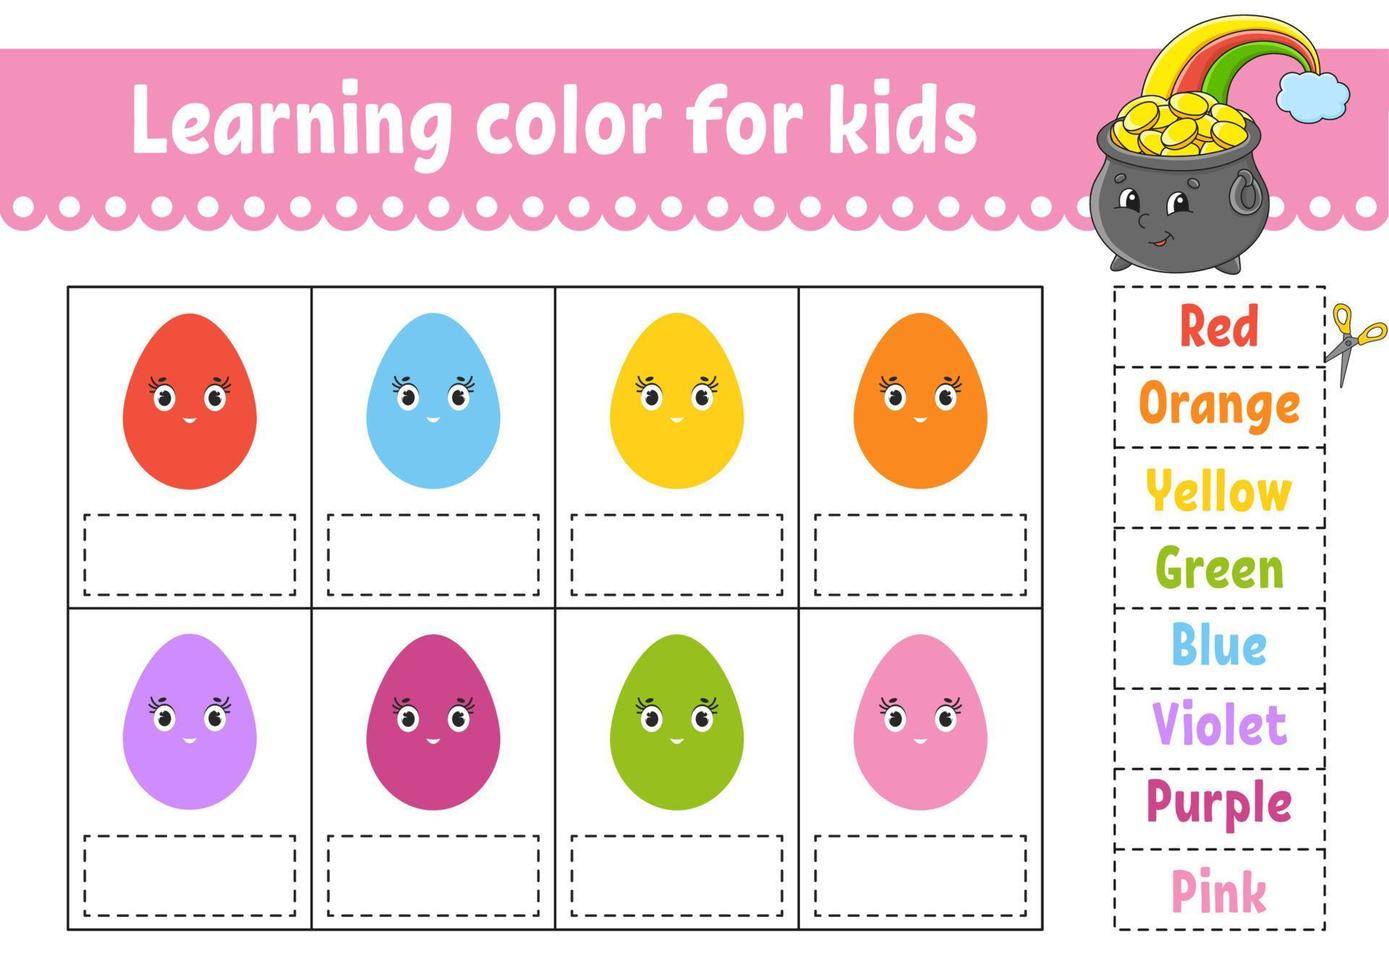 Learning color for kids. Education developing worksheet. Activity page with color pictures. Riddle for children. Isolated vector illustration. Funny character. cartoon style.